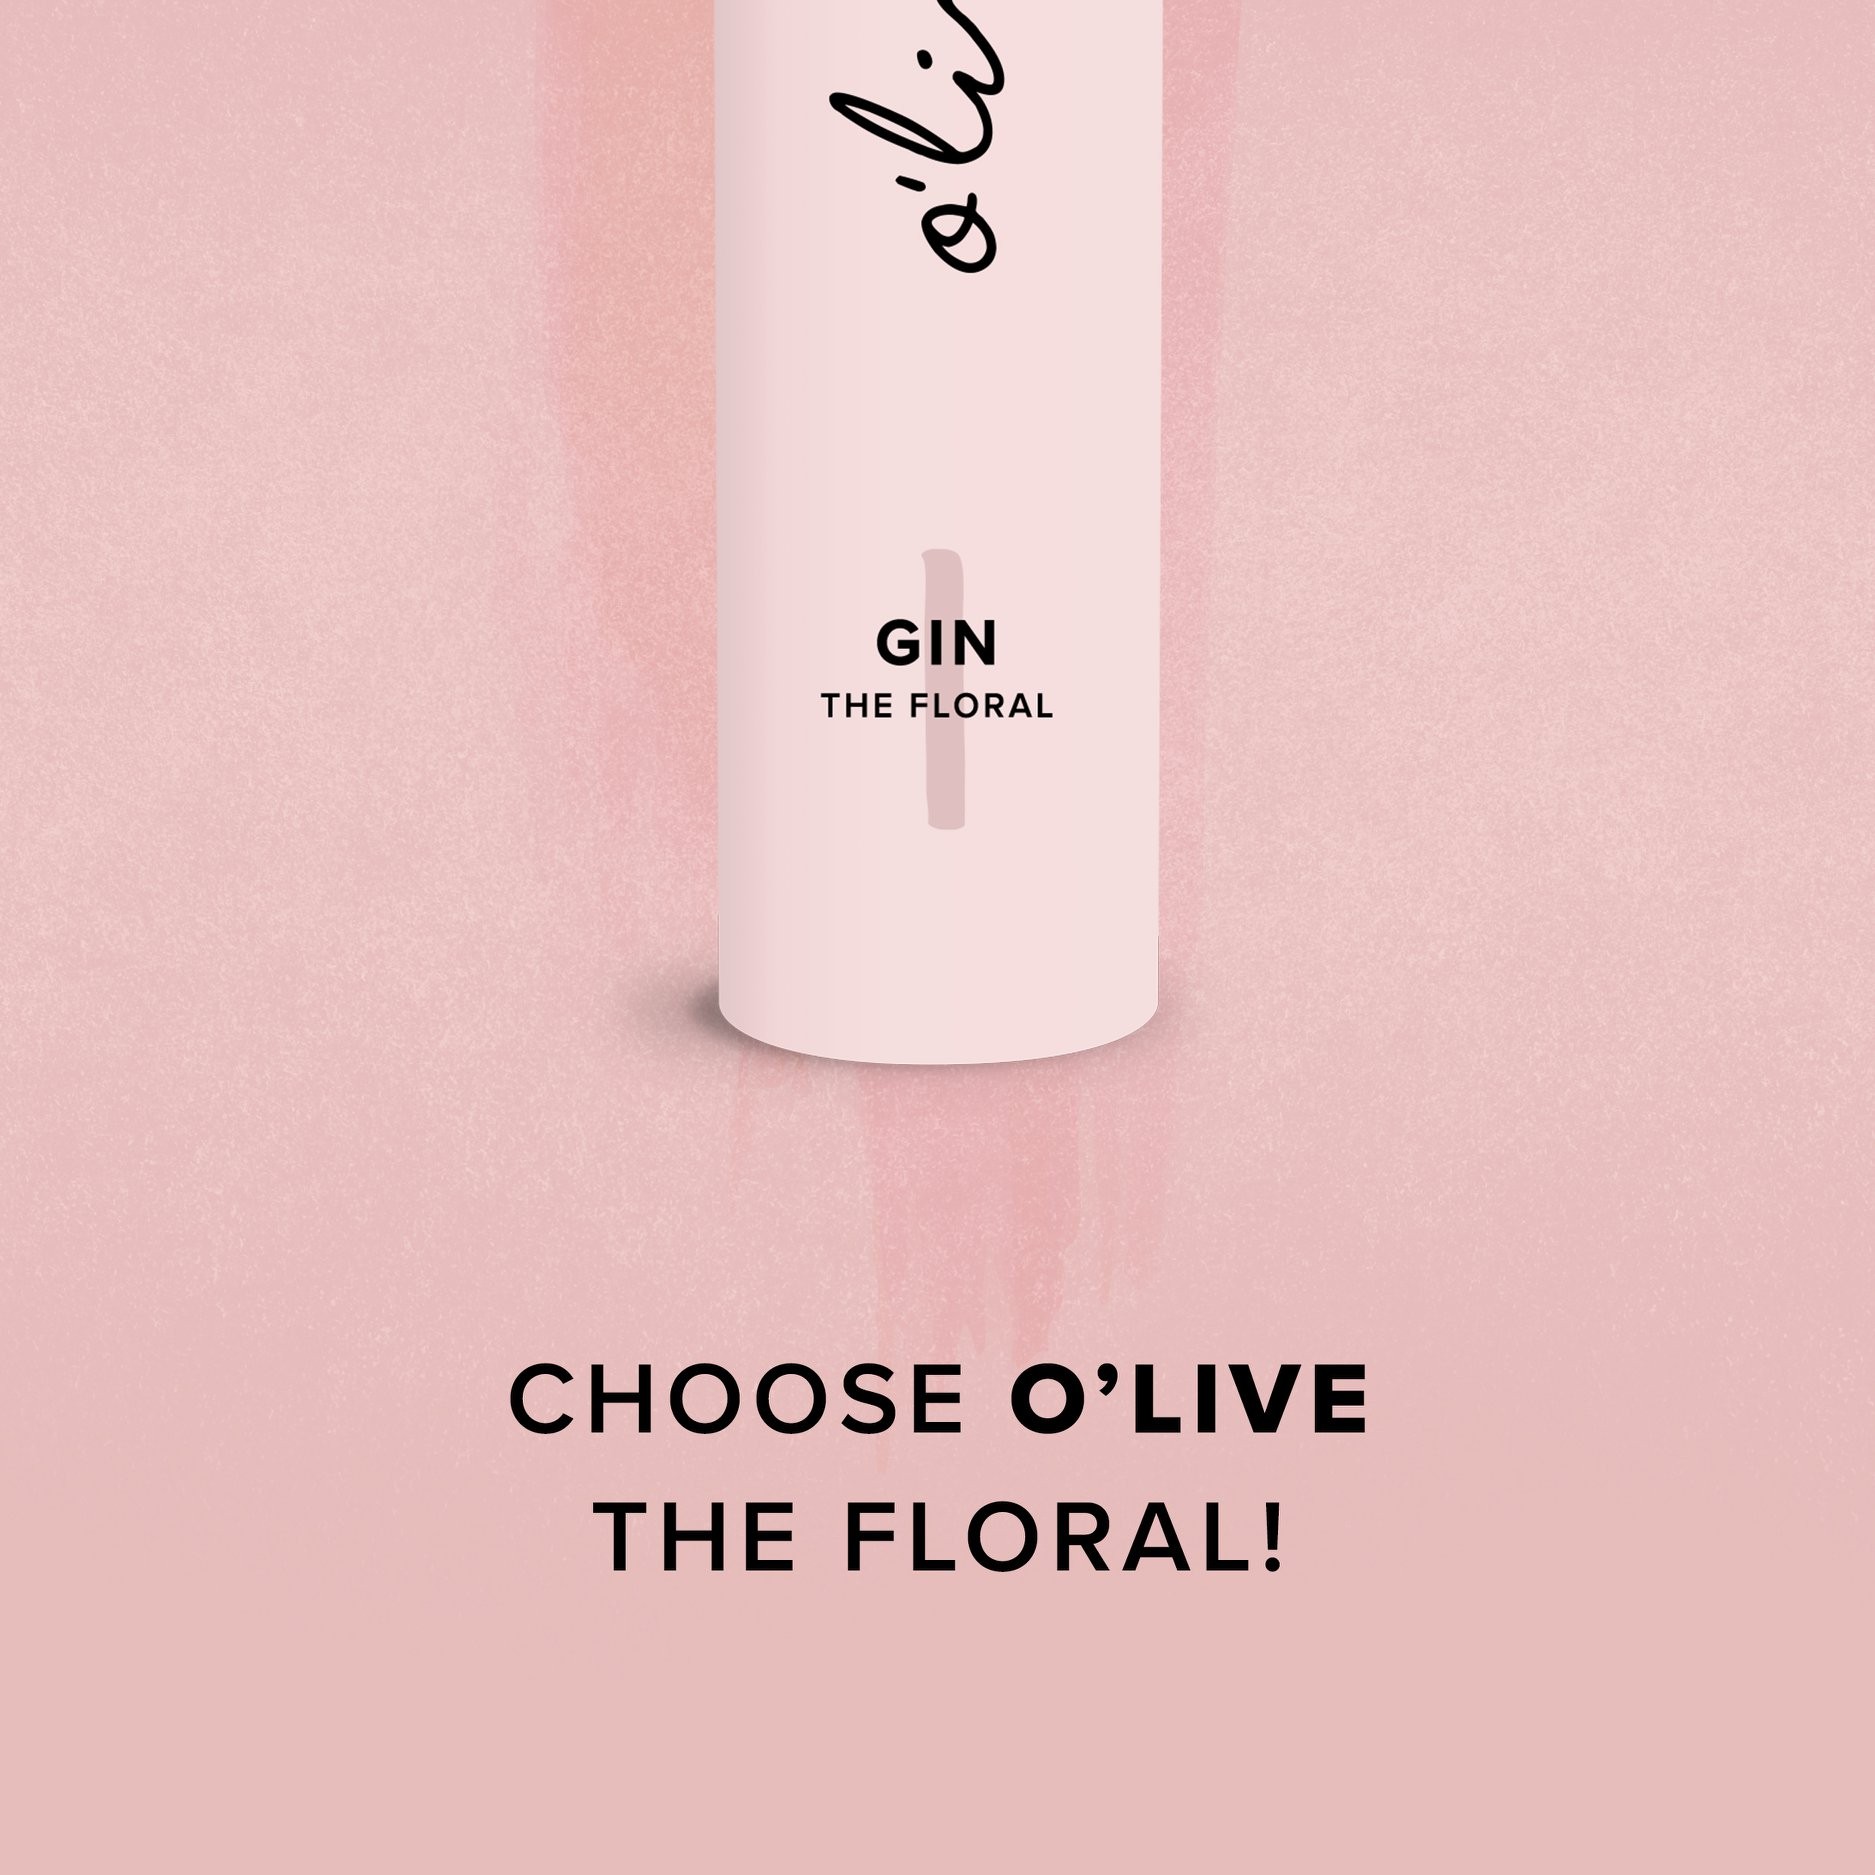 GIN O'Live THE FLORAL 0.5l-...